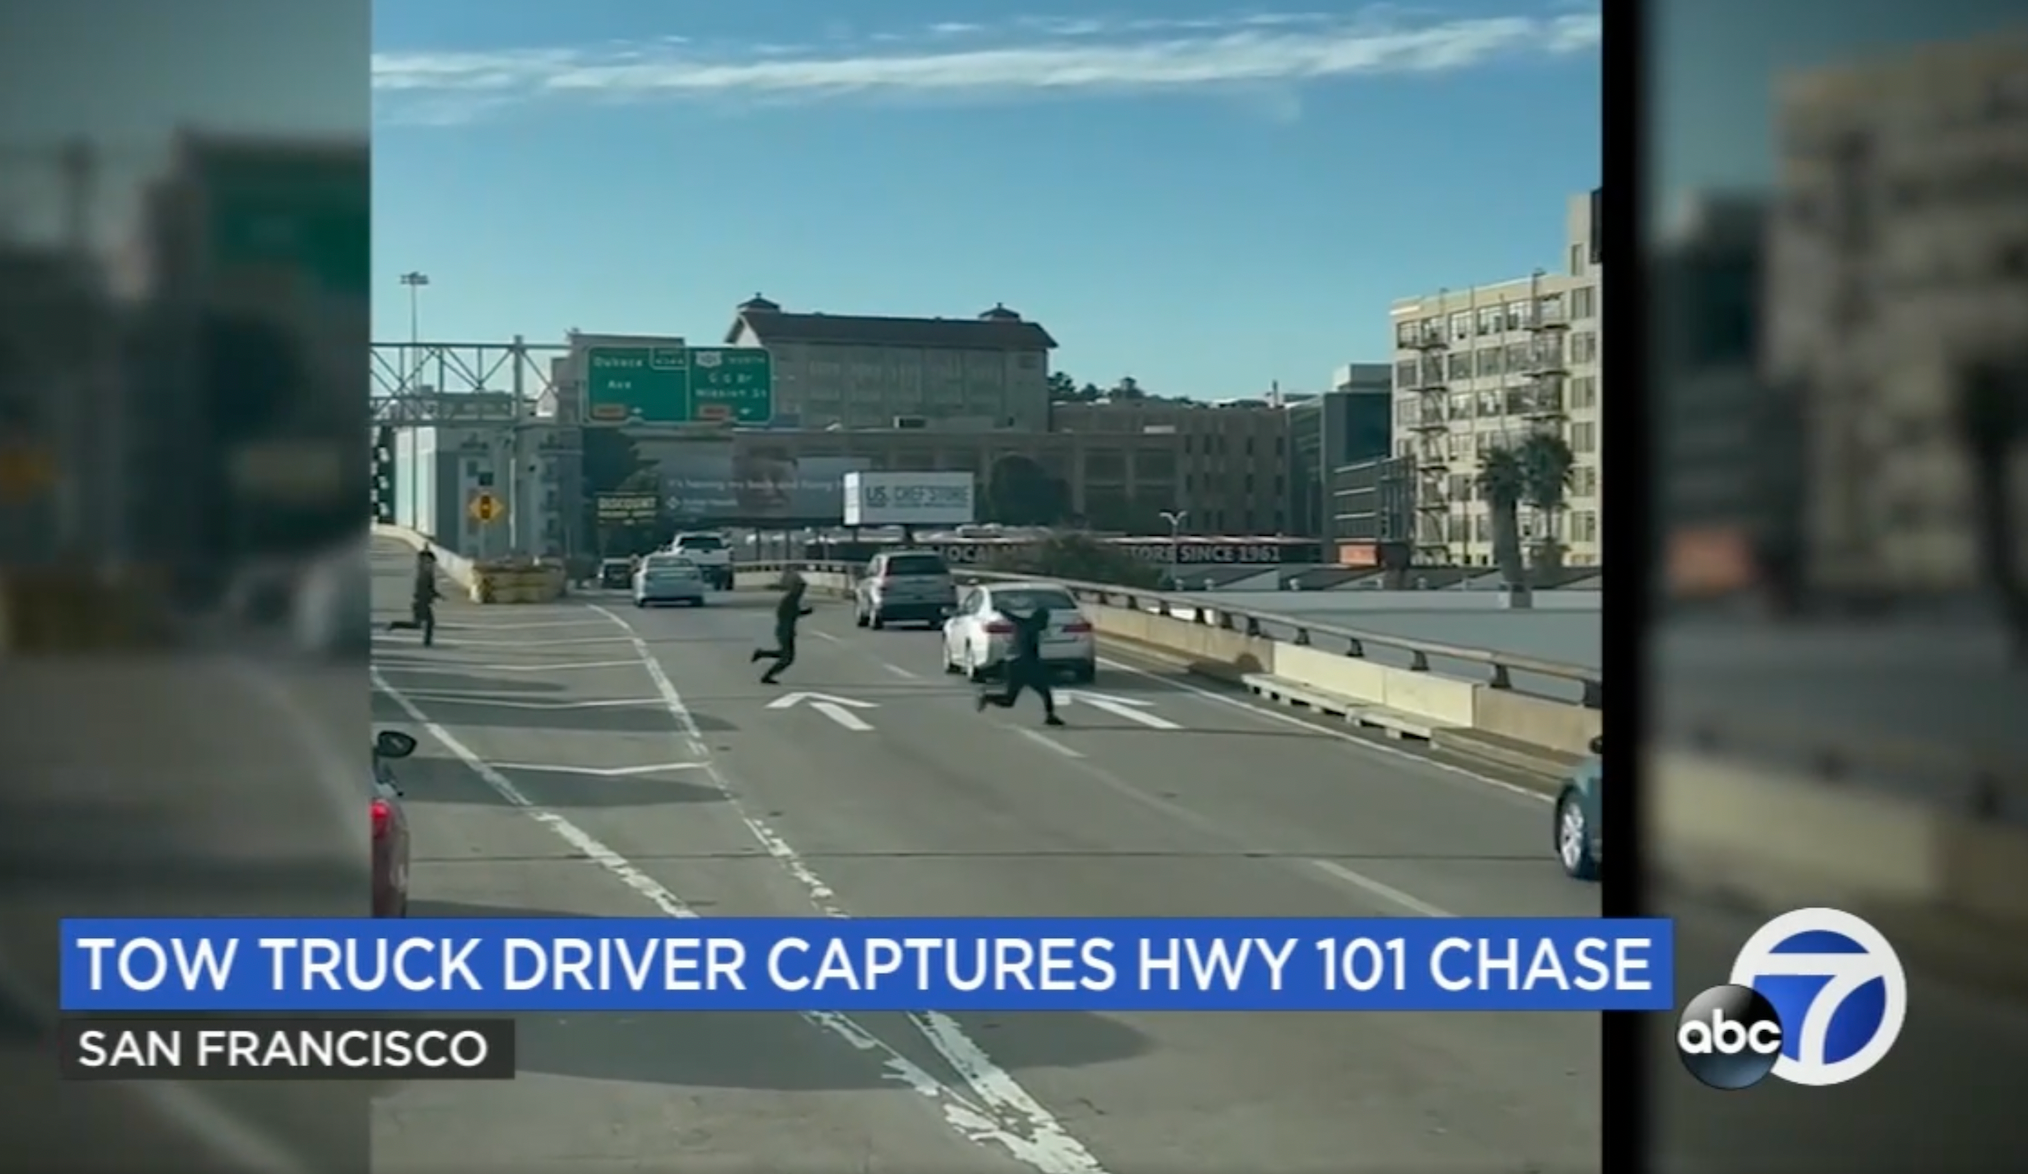 No, it’s not a scene from a new ‘Dirty Harry’ movie: Real-life suspected car burglars caught on video running from cops across San Francisco freeway